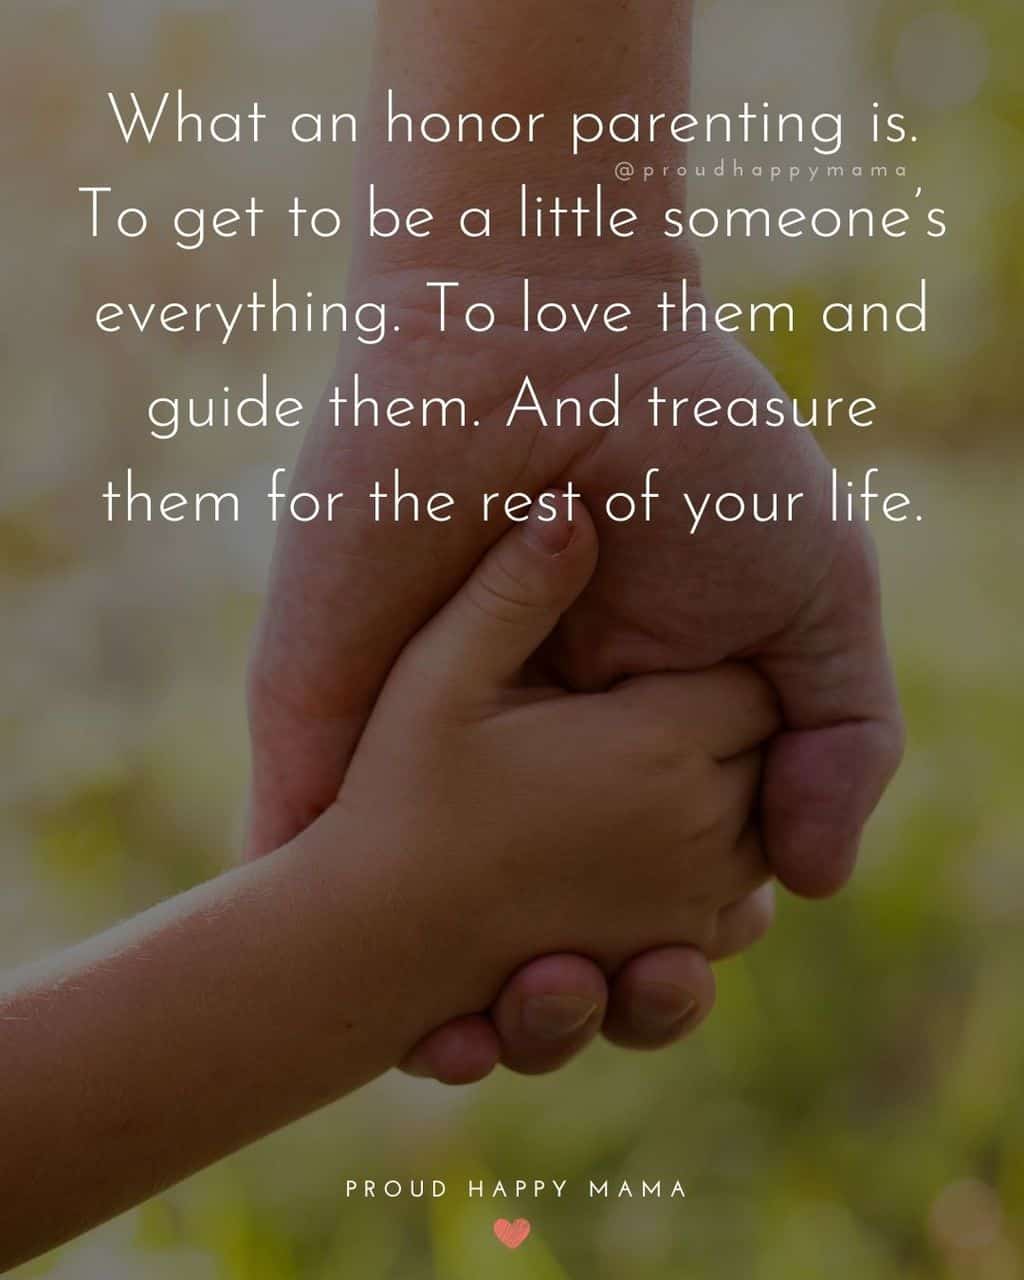 Inspirational Parenting Quotes - What an honor parenting is.